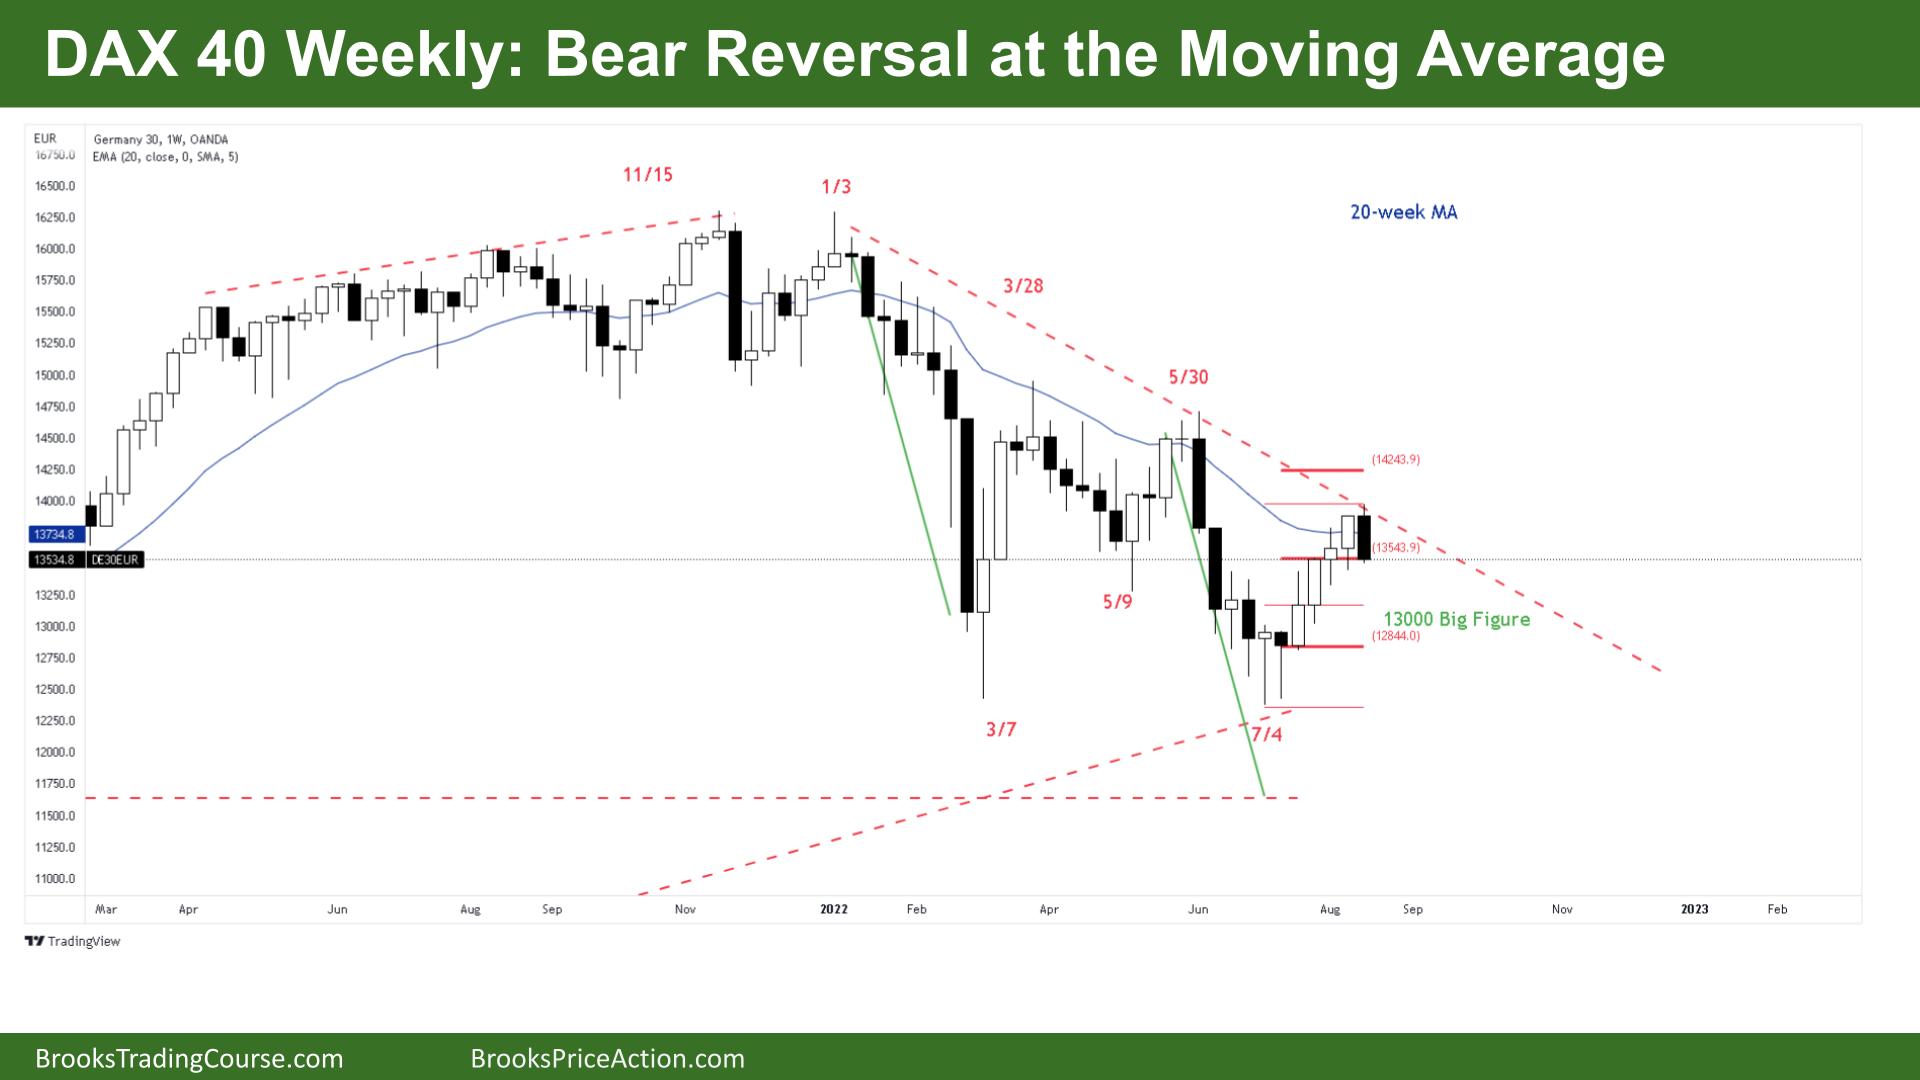 DAX 40 Bear Reversal at the Moving Average